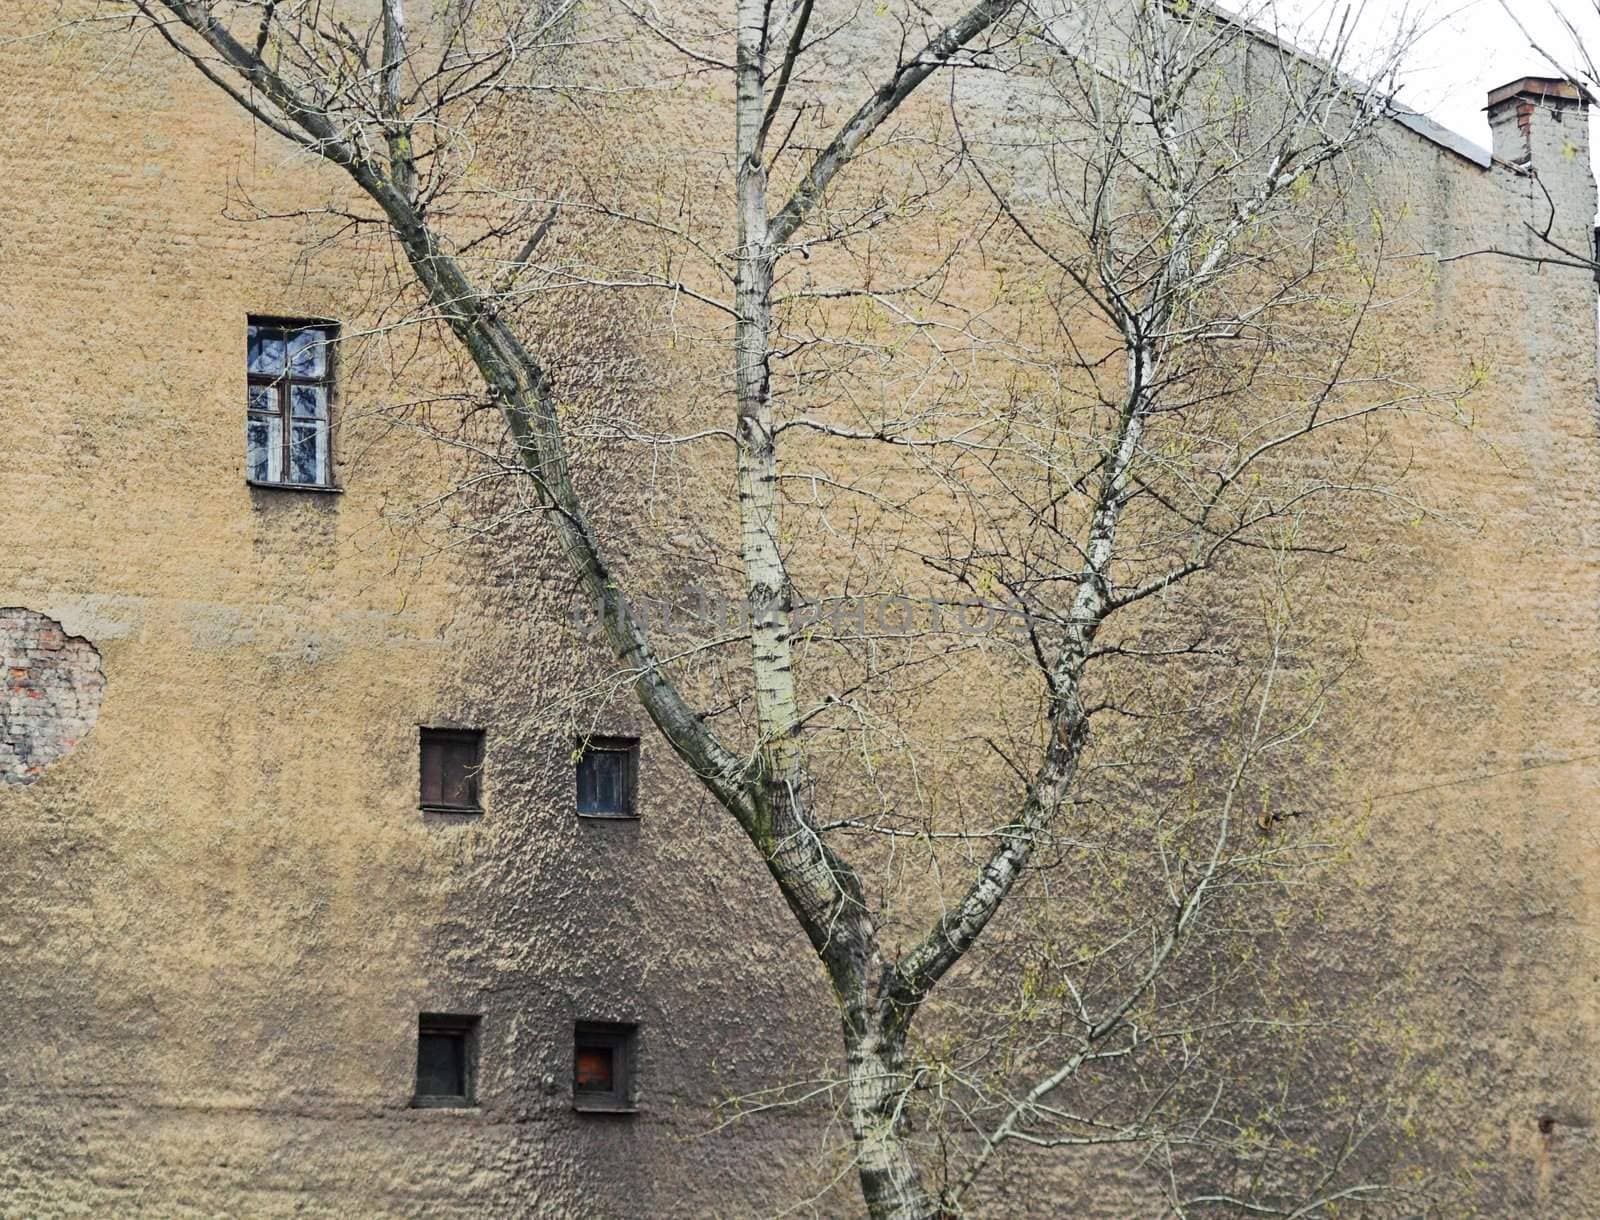 A corroded wall with windows and a tree in a back alley.